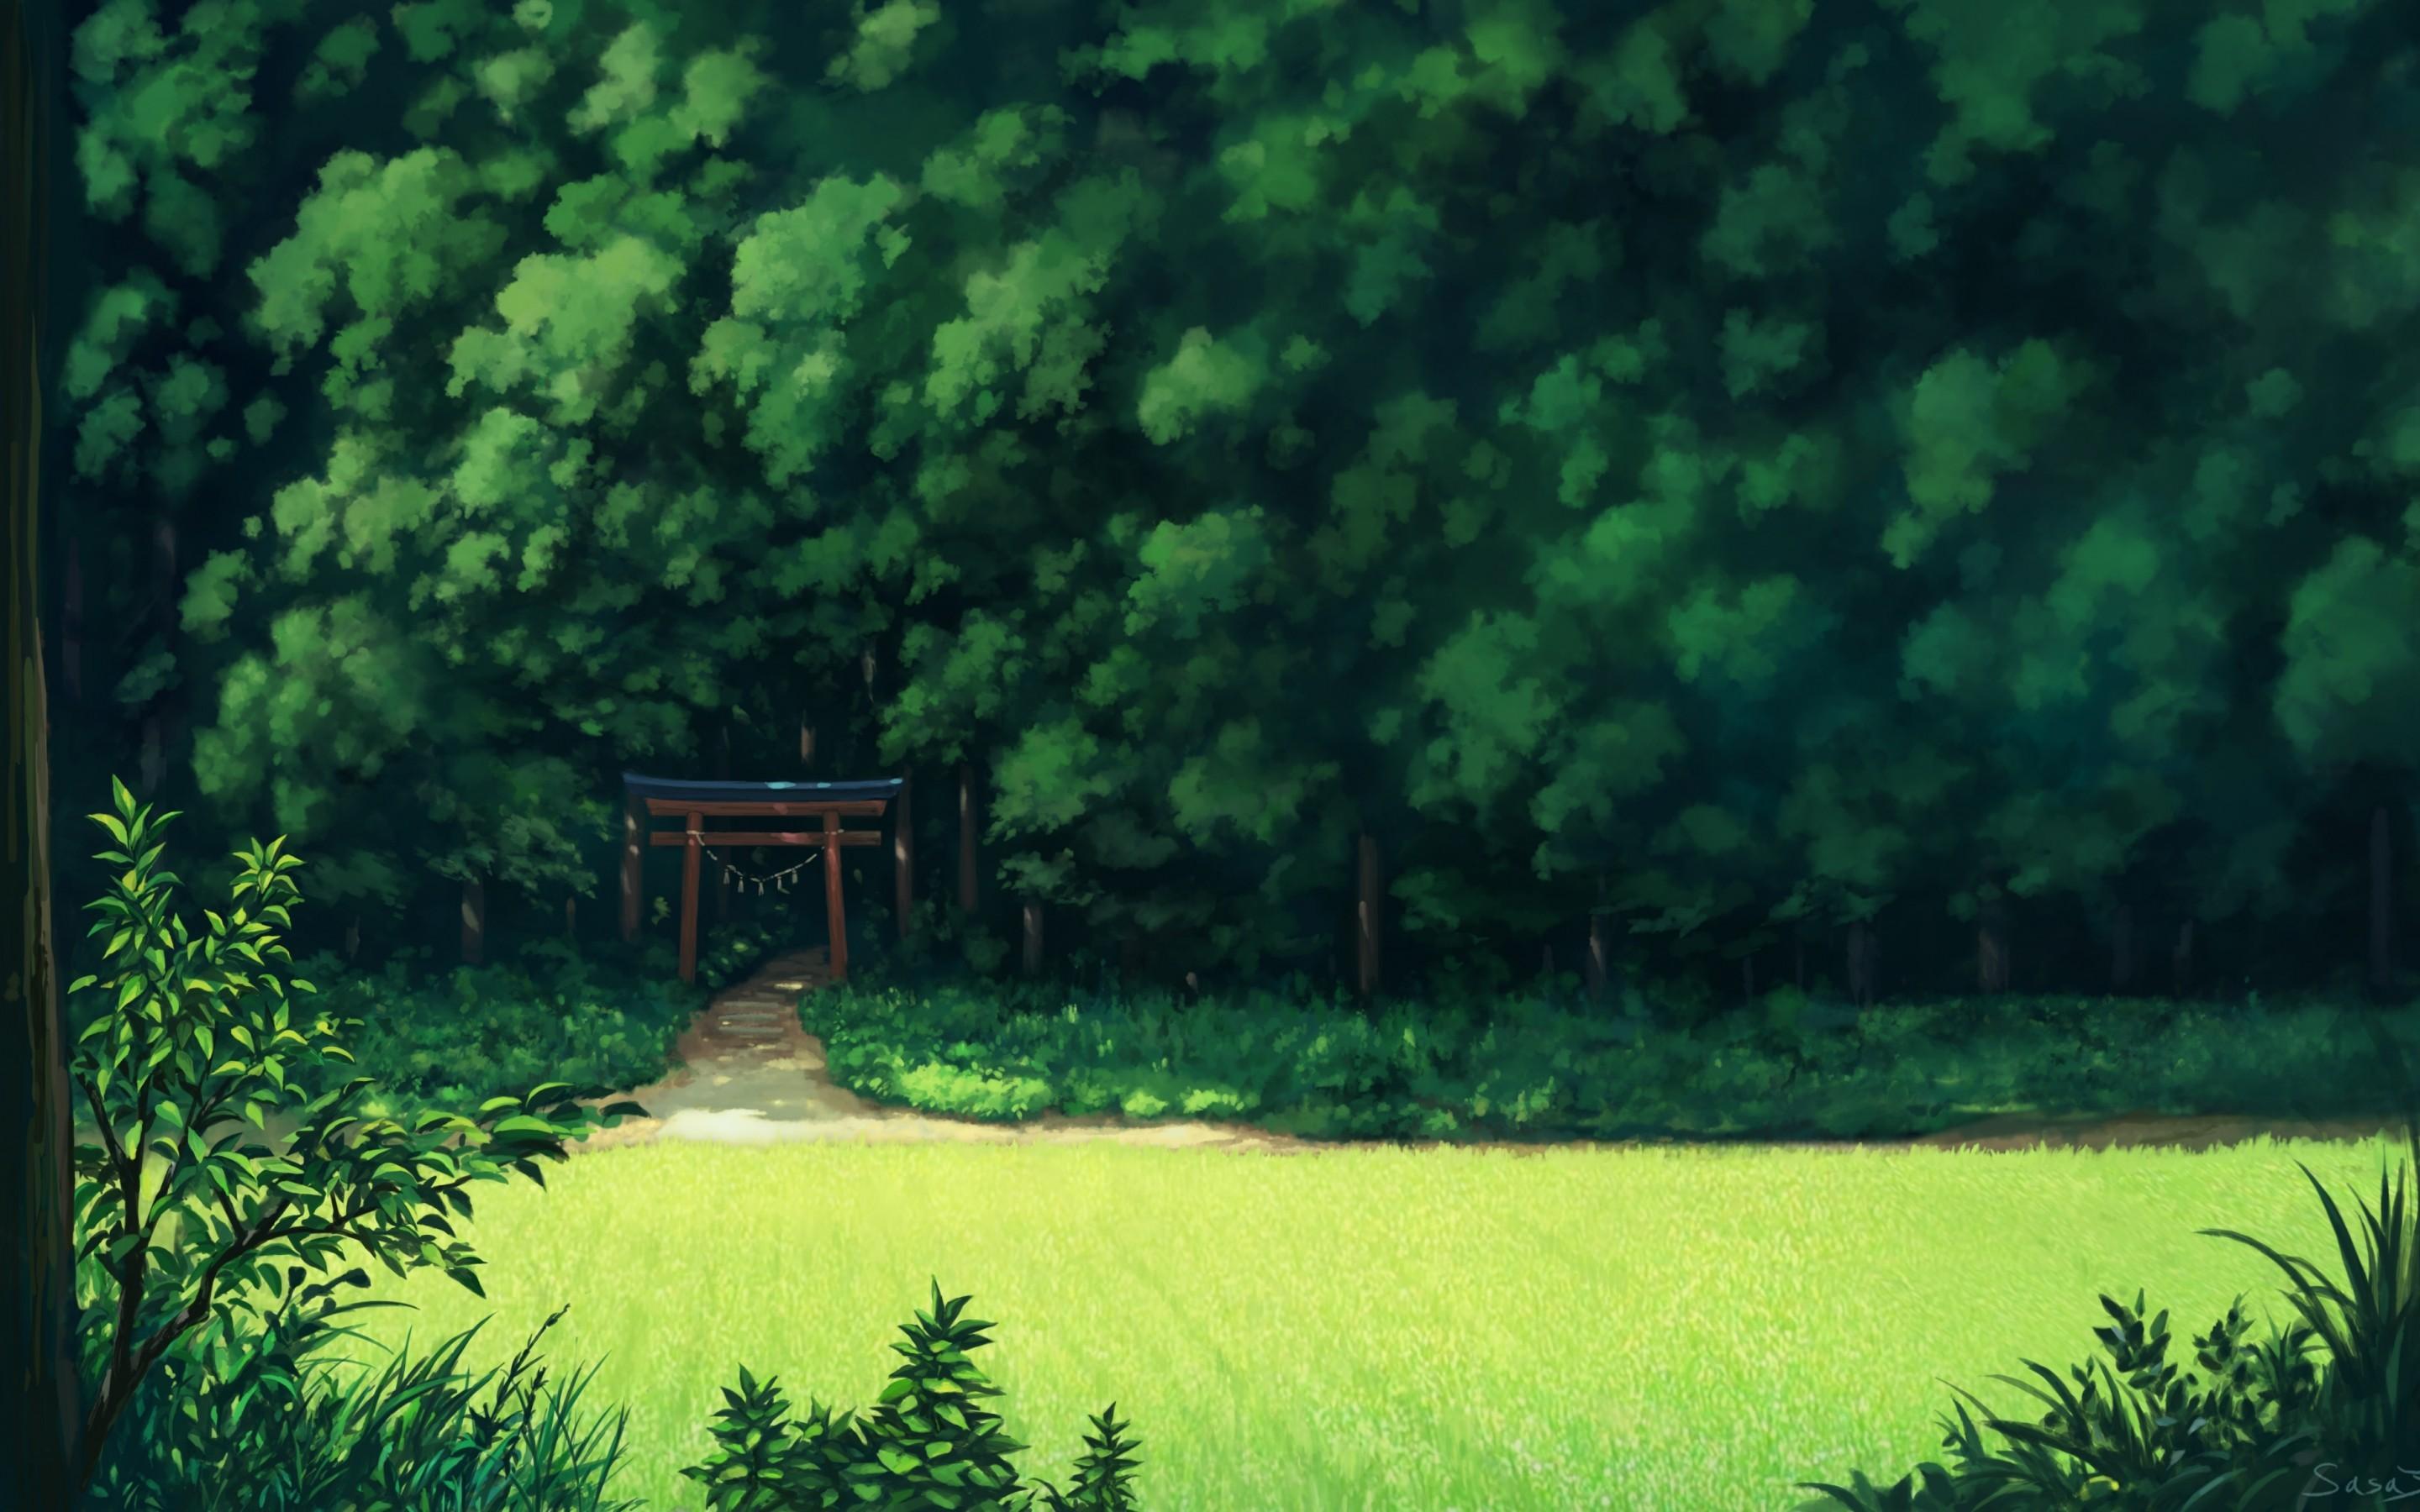 Anime Grass Scenery Wallpapers - Wallpaper Cave